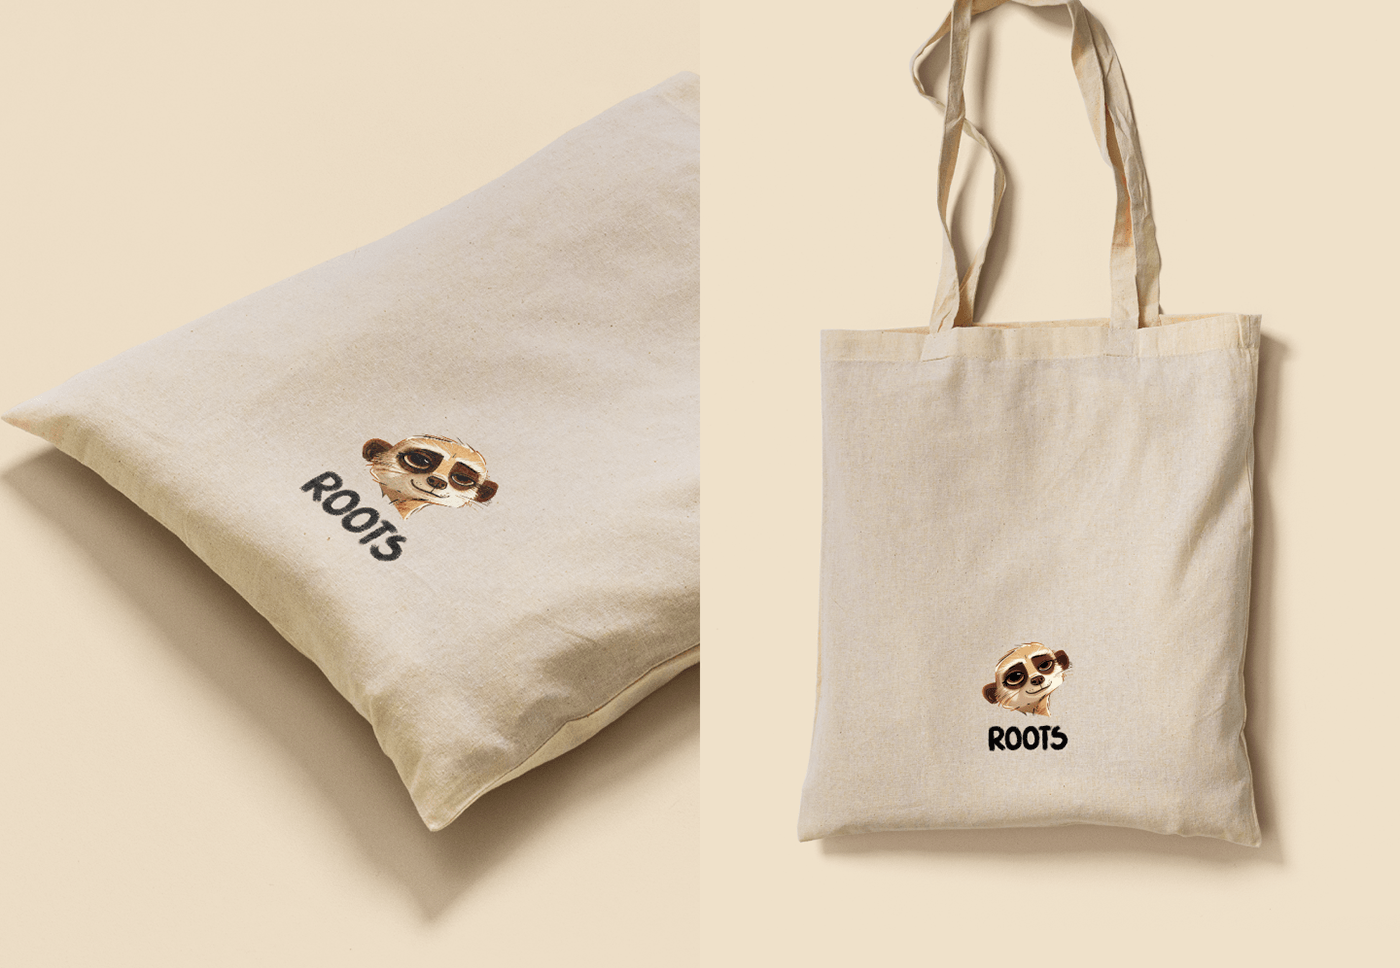 Brand Identity for eco-friendly store. Tote bag design with meerkat.